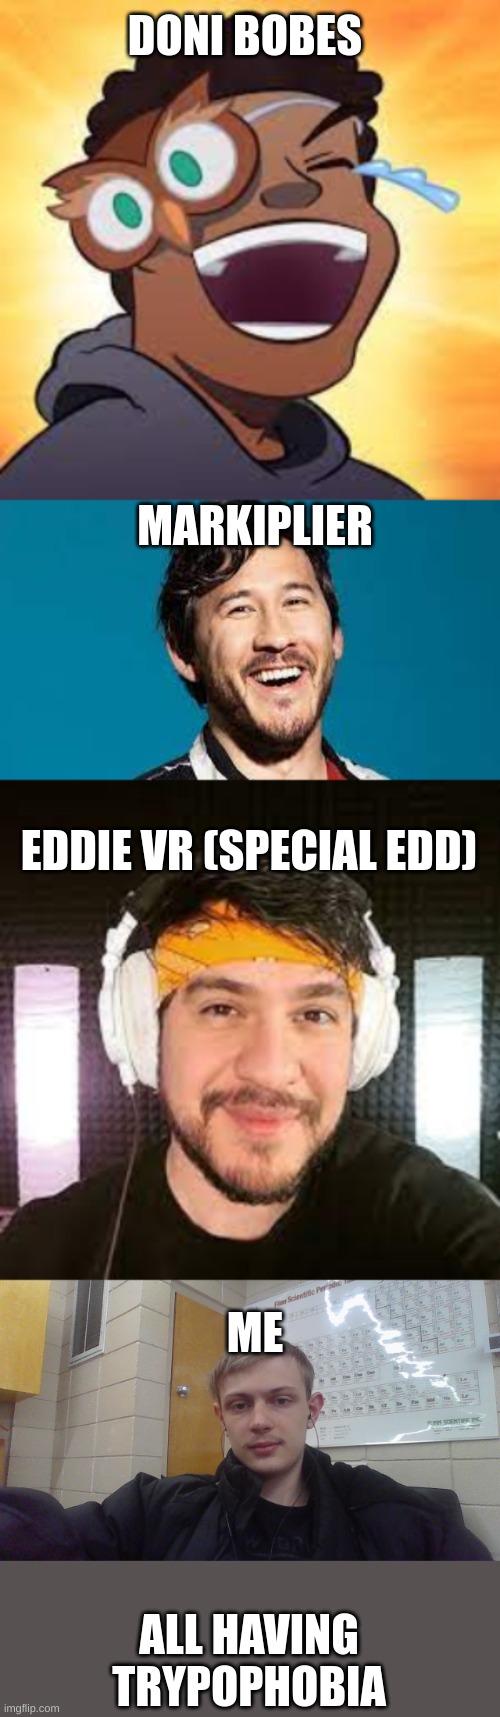 DONI BOBES; MARKIPLIER; EDDIE VR (SPECIAL EDD); ME; ALL HAVING TRYPOPHOBIA | image tagged in trypophobia | made w/ Imgflip meme maker